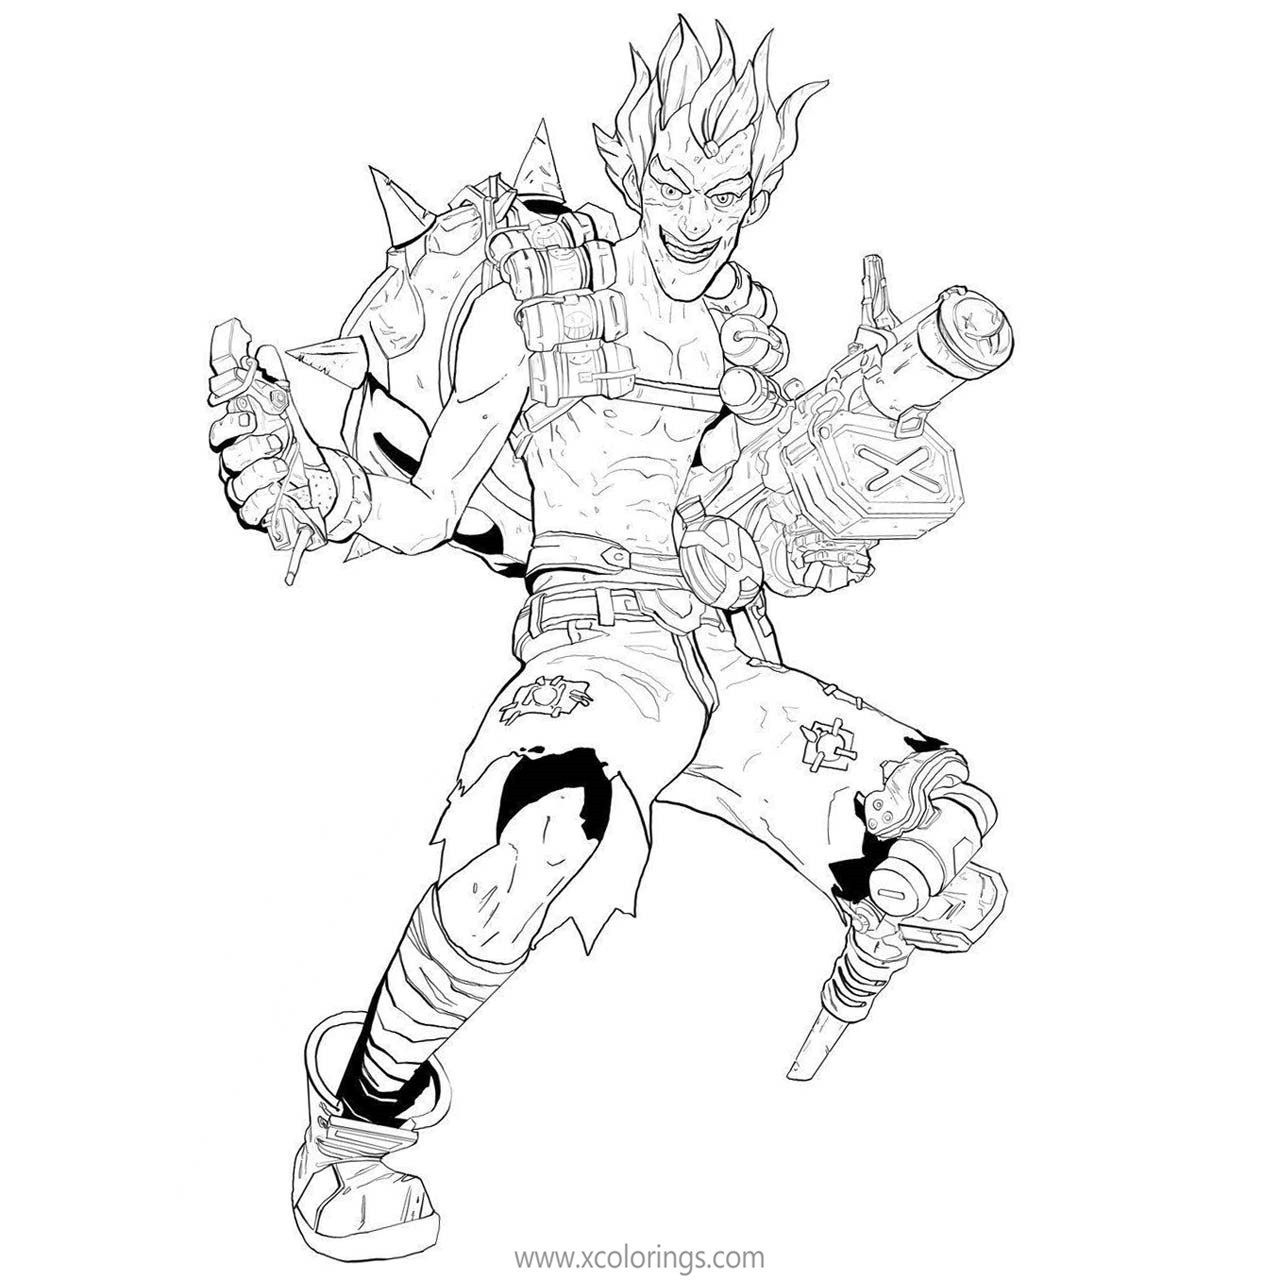 Free Overwatch Coloring Pages Junkrat Frag Launcher printable